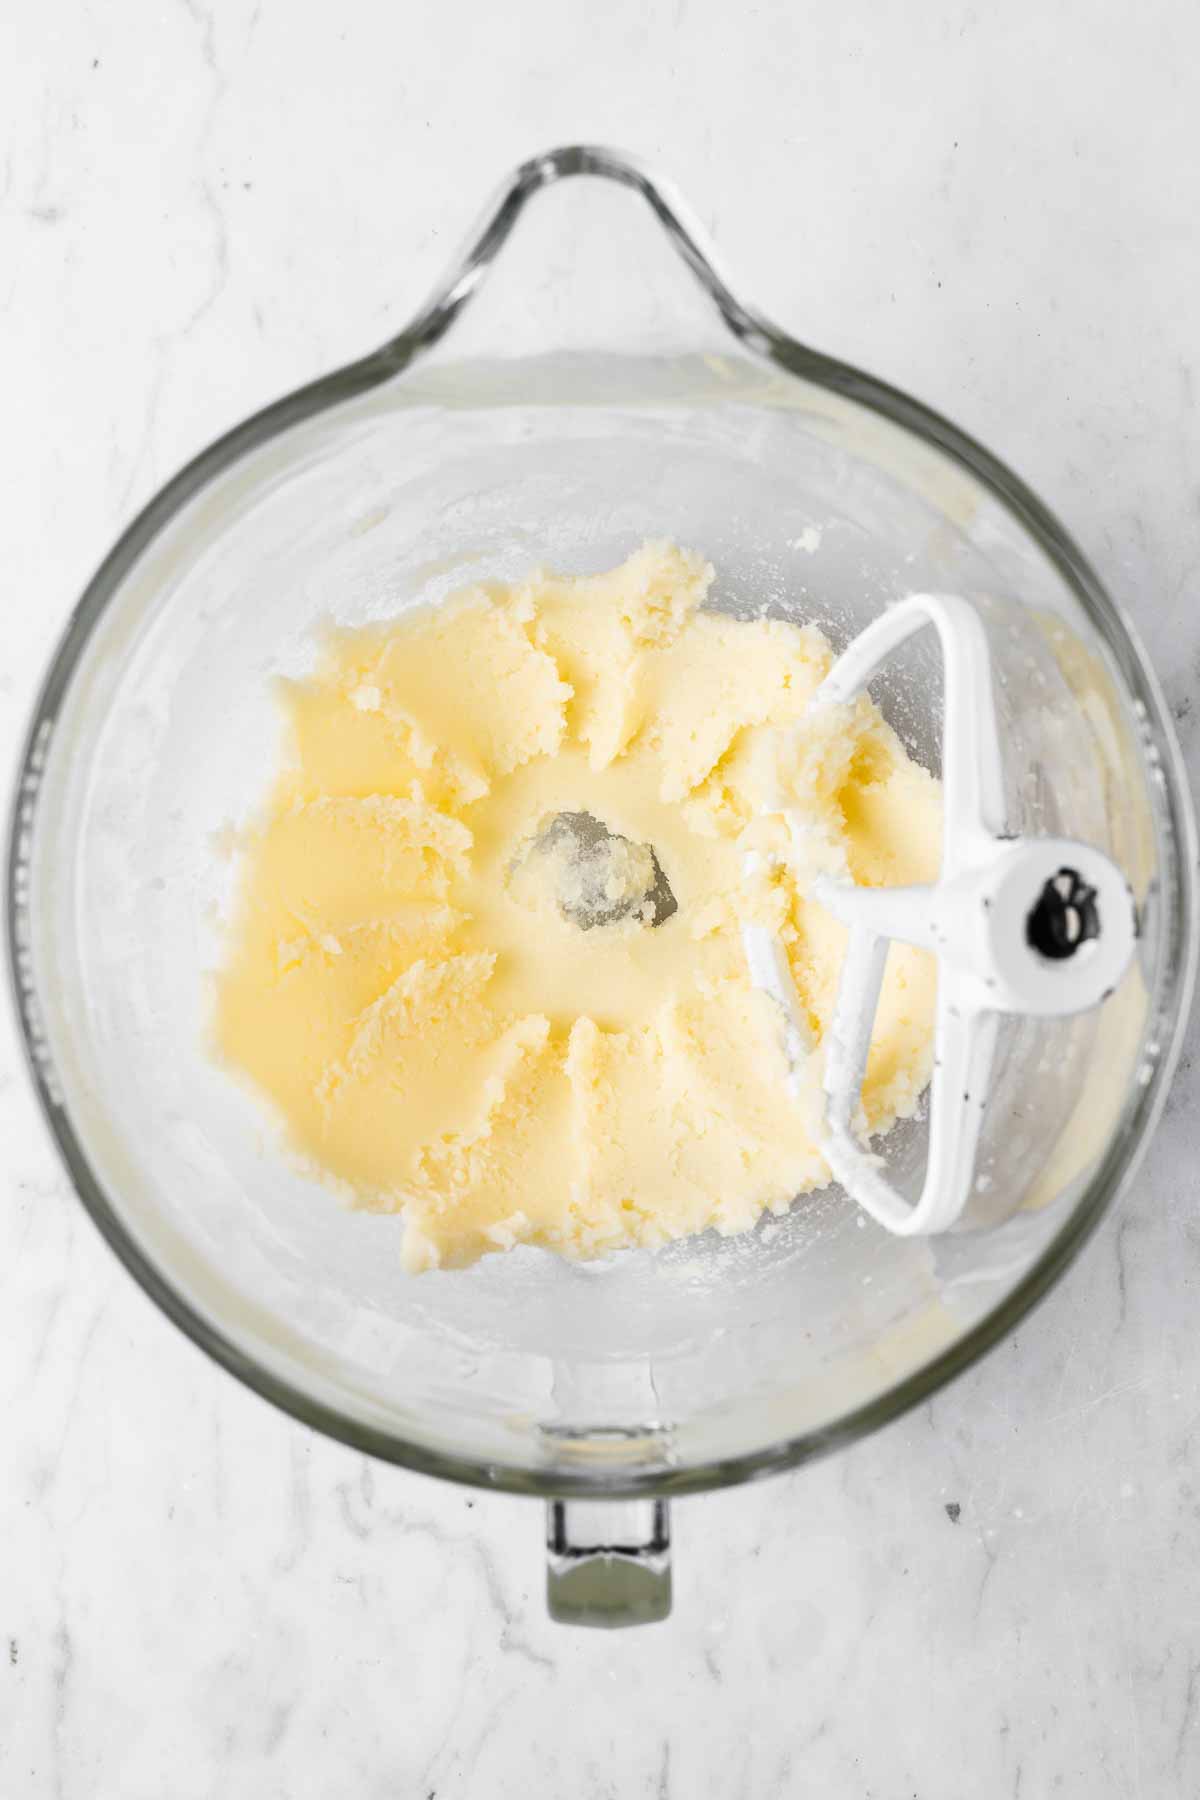 Creamed butter and sugar in a clear glass mixing bowl.